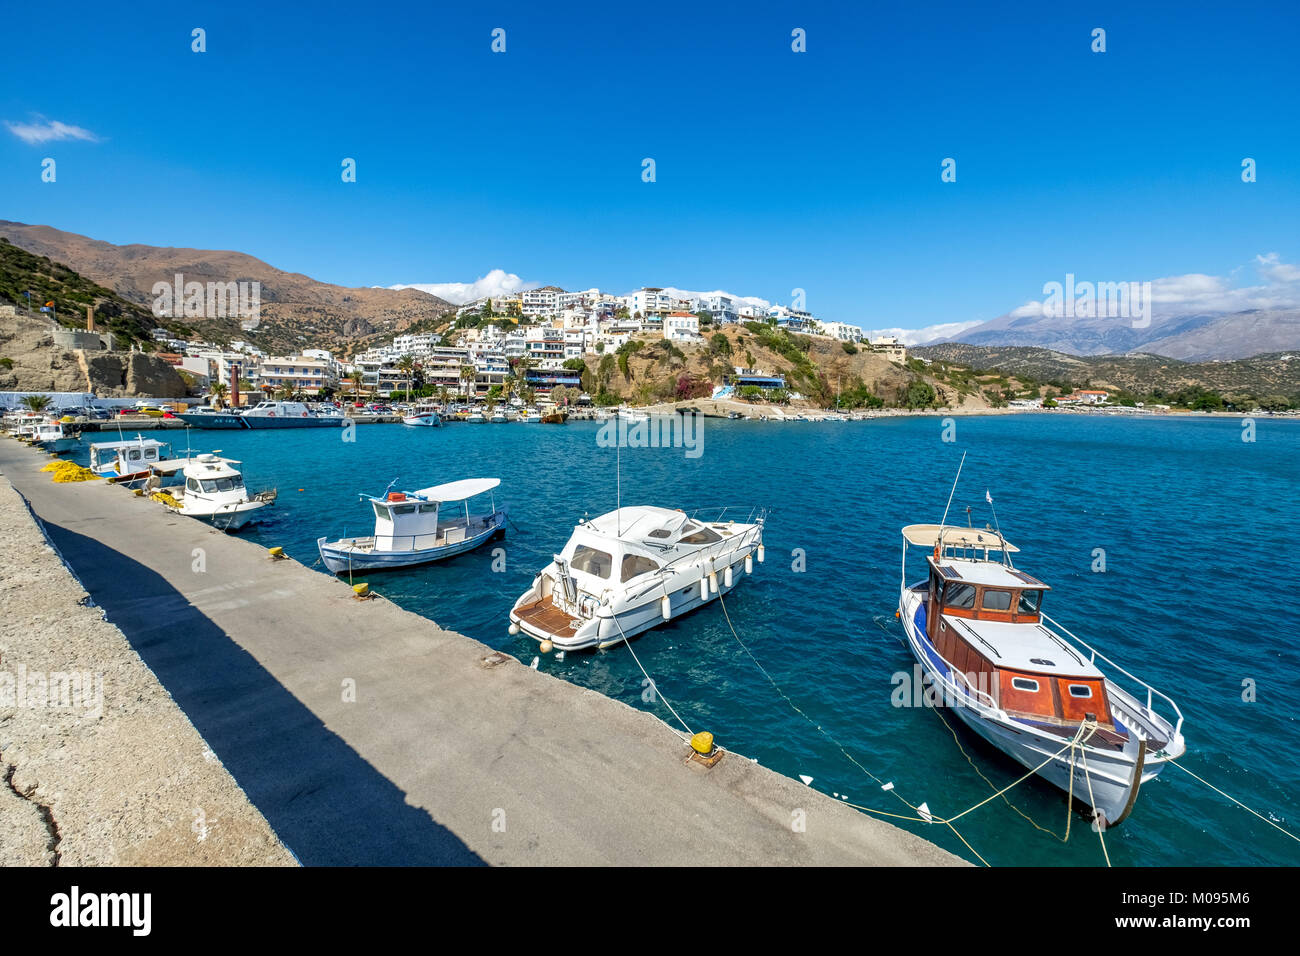 Fishing boats in the port of Agia Galini, Crete, Greece, Europe, Agia Galini, Europe, Crete, Greece, GR, Travel, Tourism, Travel destination, Sightsee Stock Photo